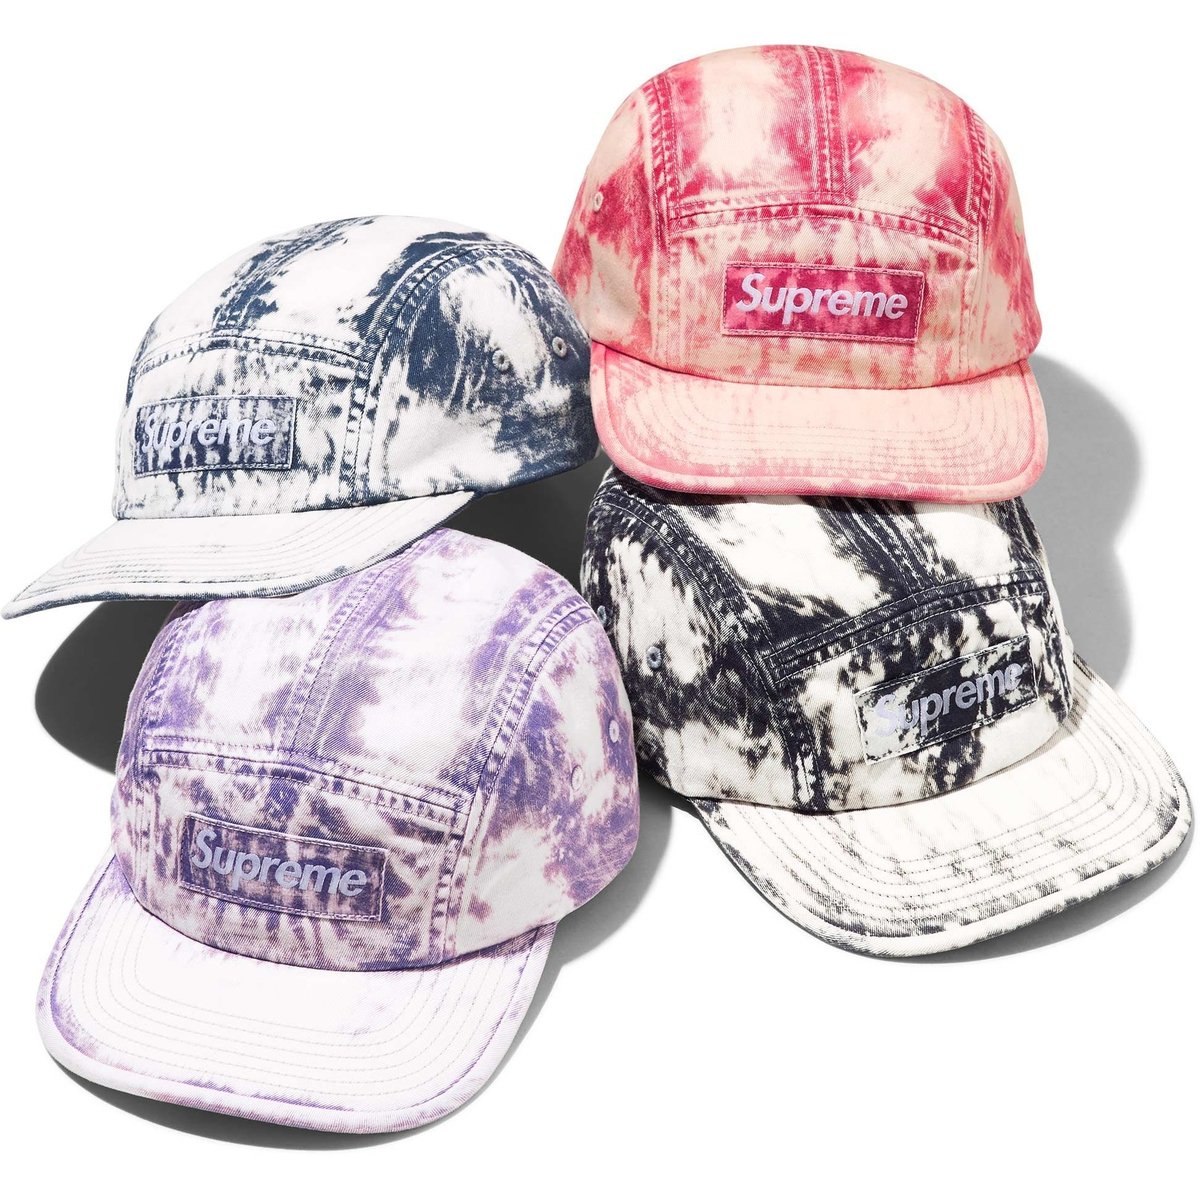 Supreme Bleached Chino Camp Cap released during spring summer 24 season